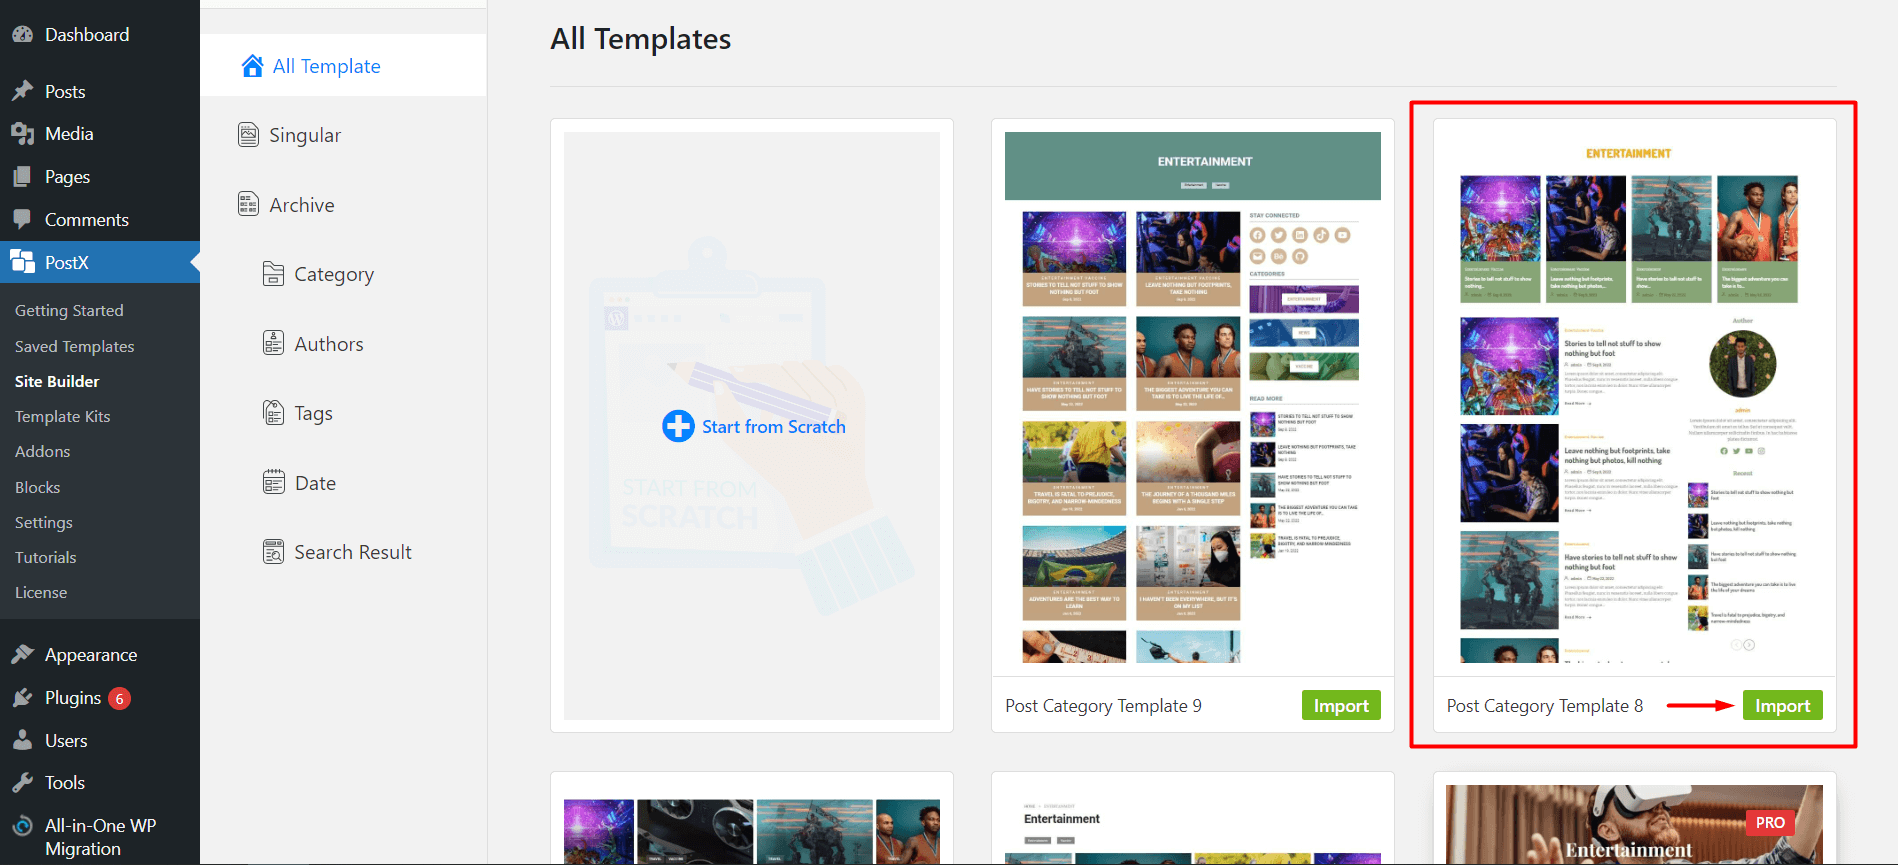 Importing Premade Templates for Category Page